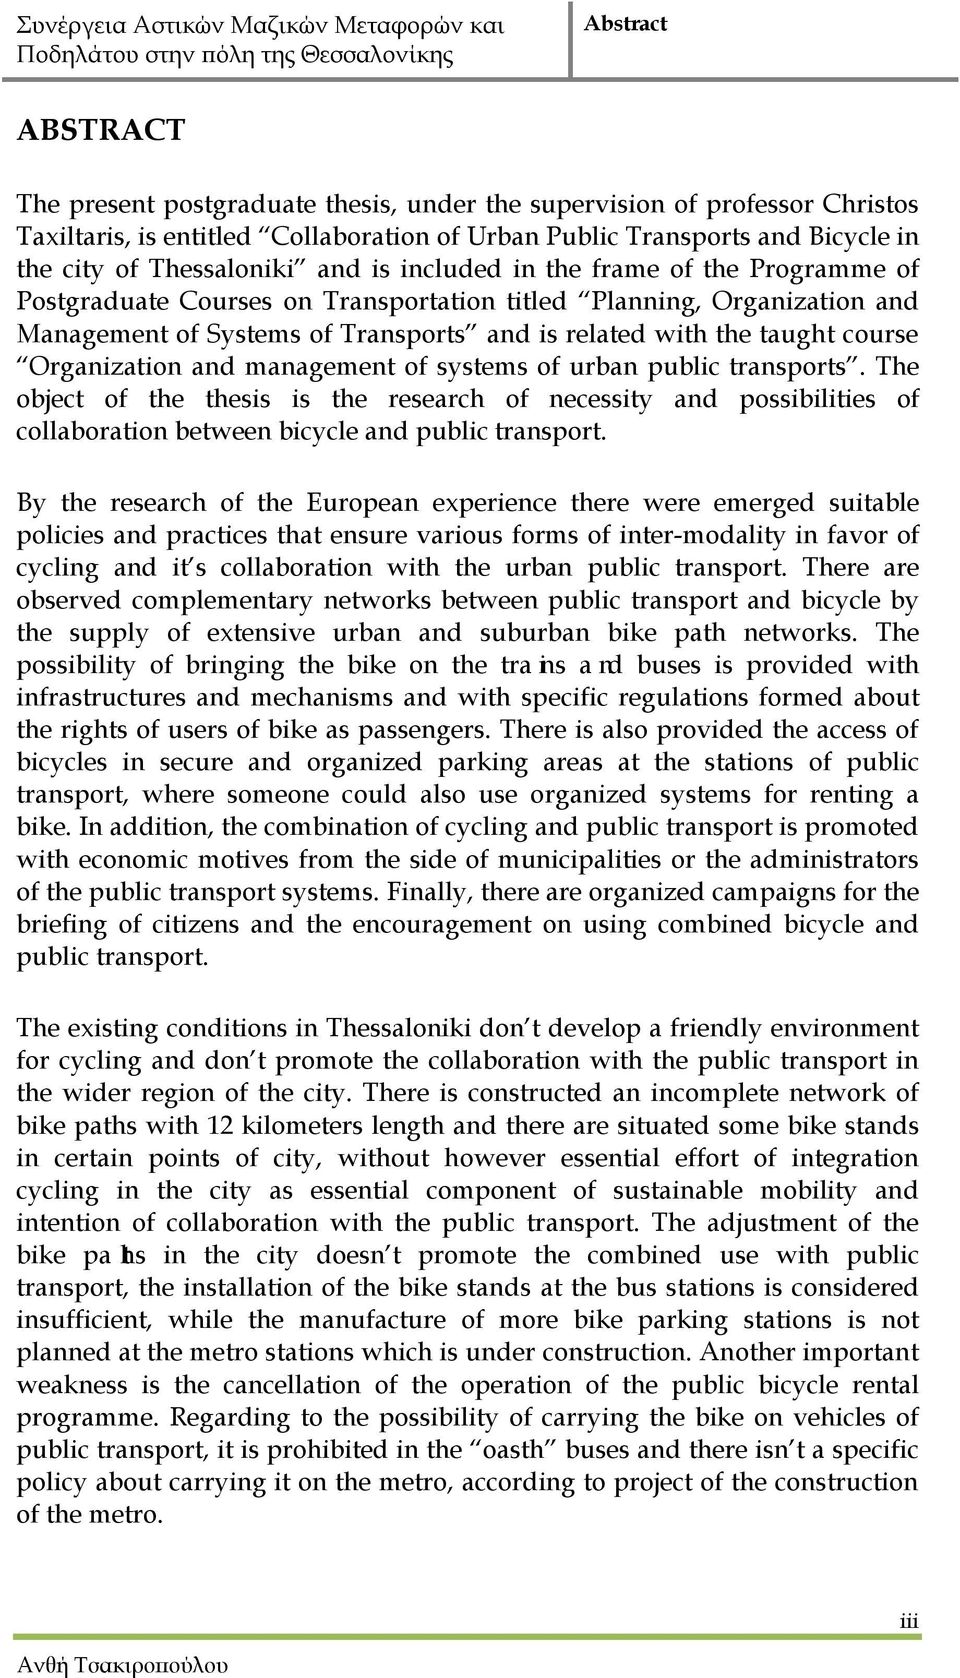 Organization and management of systems of urban public transports. The object of the thesis is the research of necessity and possibilities of collaboration between bicycle and public transport.